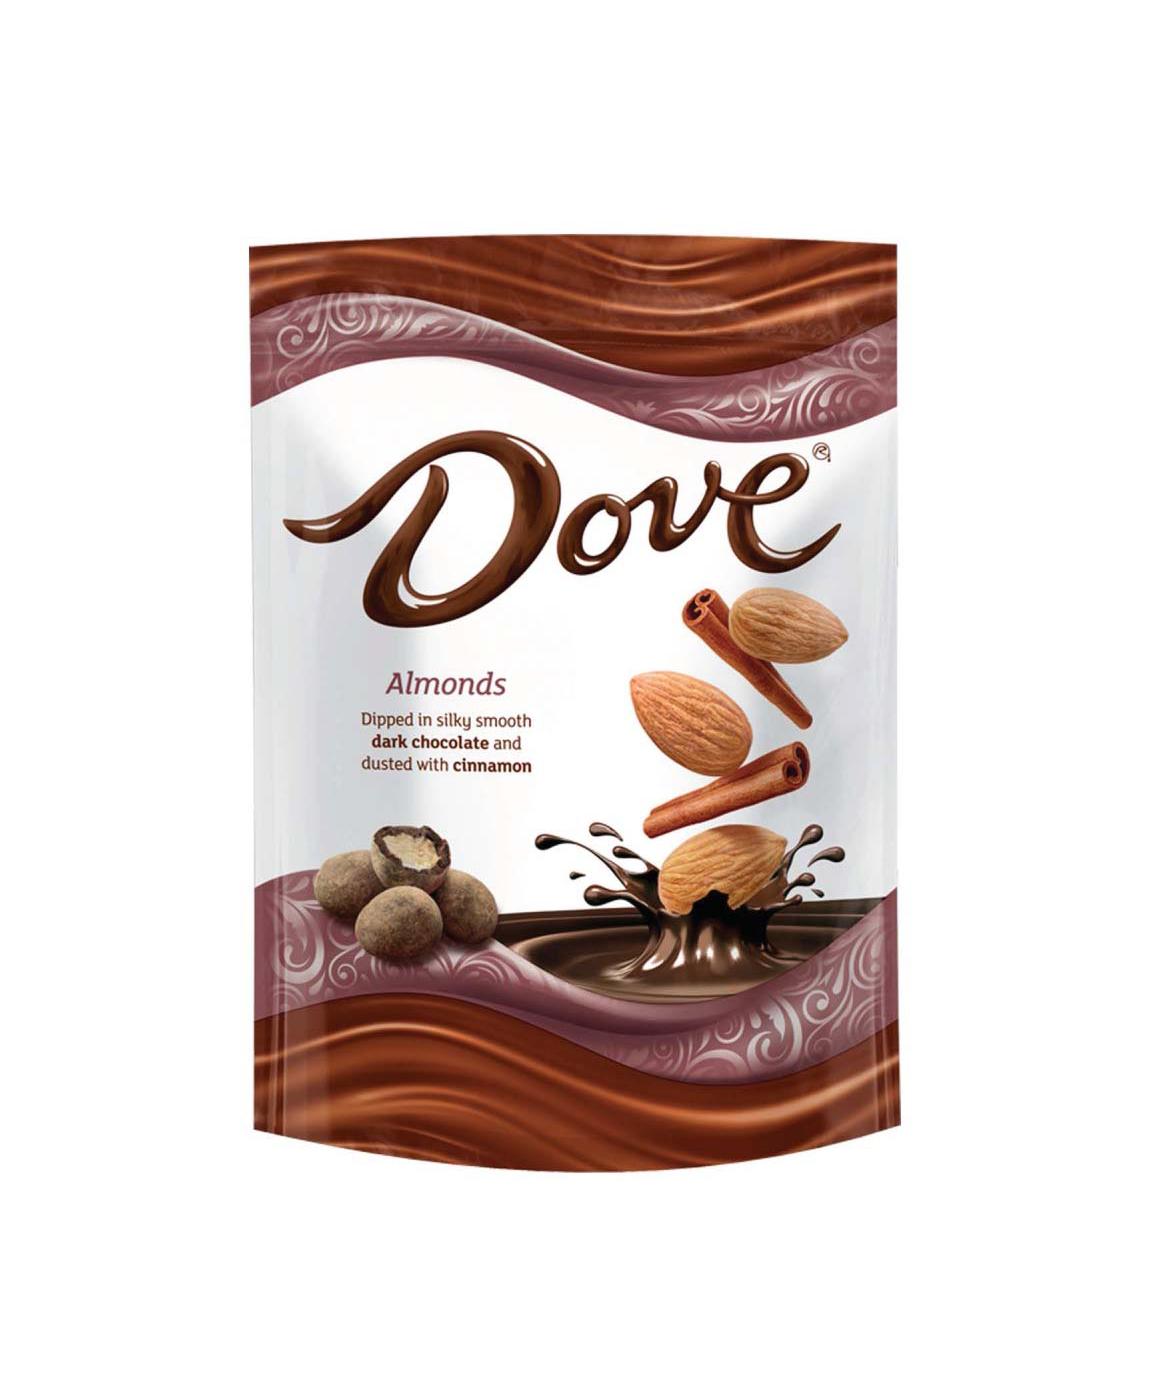 Dove Almonds With Cinnamon and Dark Chocolate Candy Bag; image 1 of 7